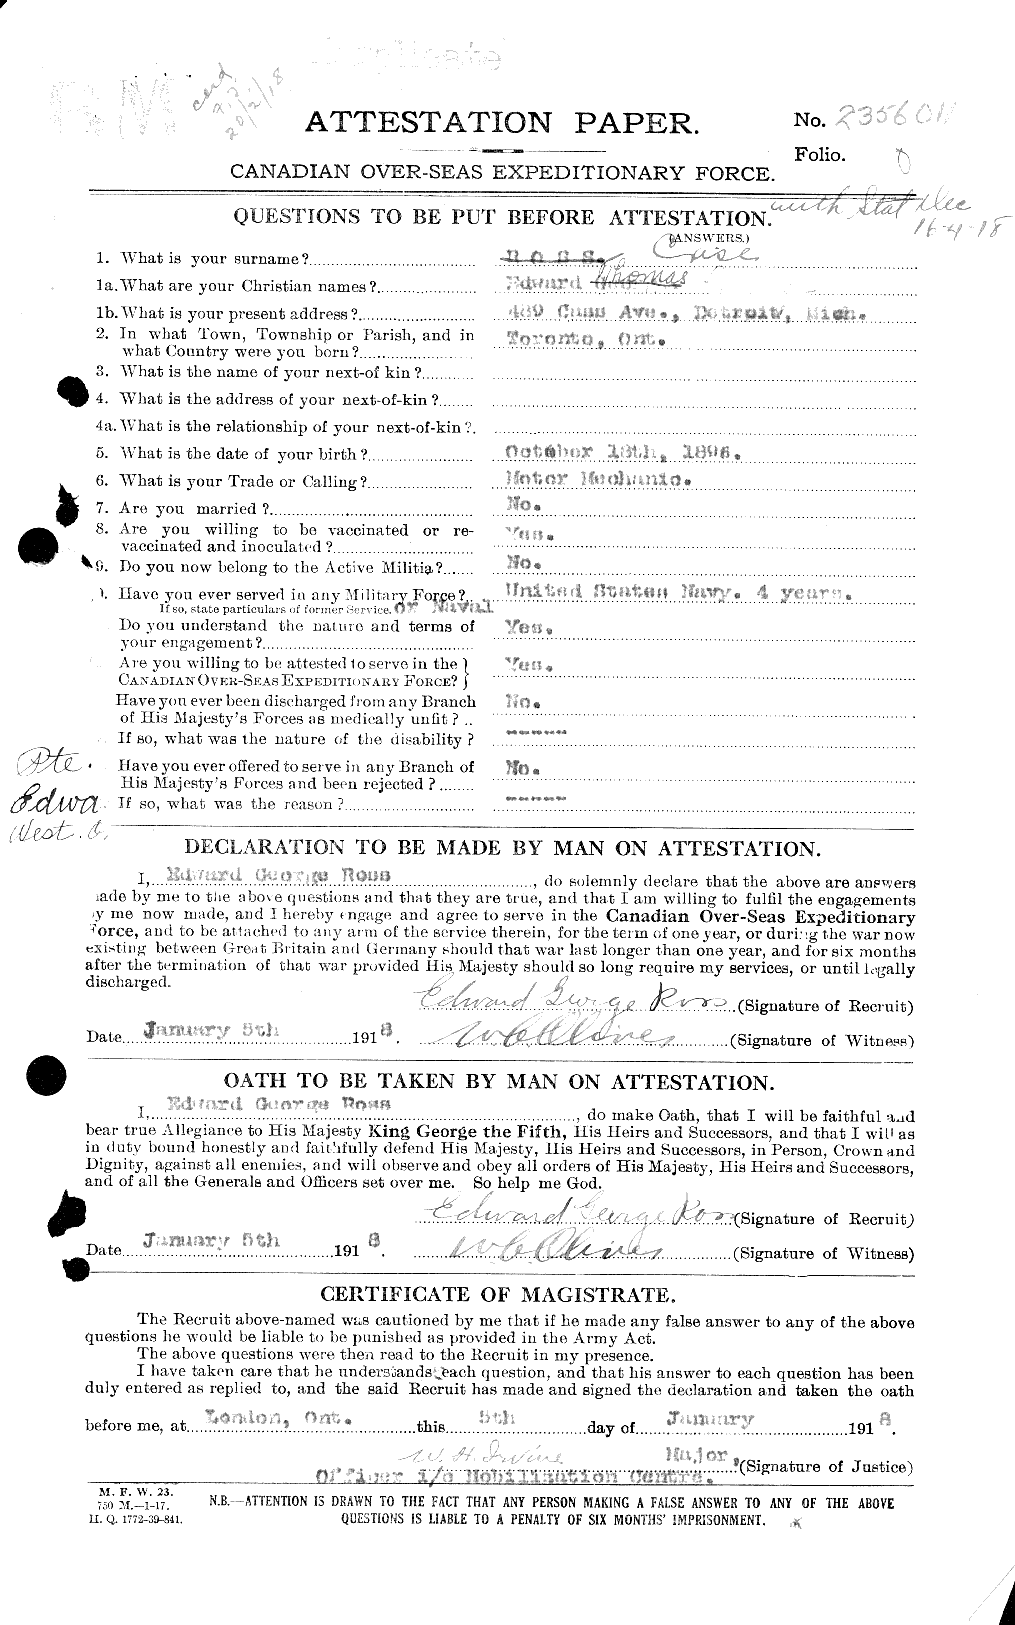 Personnel Records of the First World War - CEF 012694c